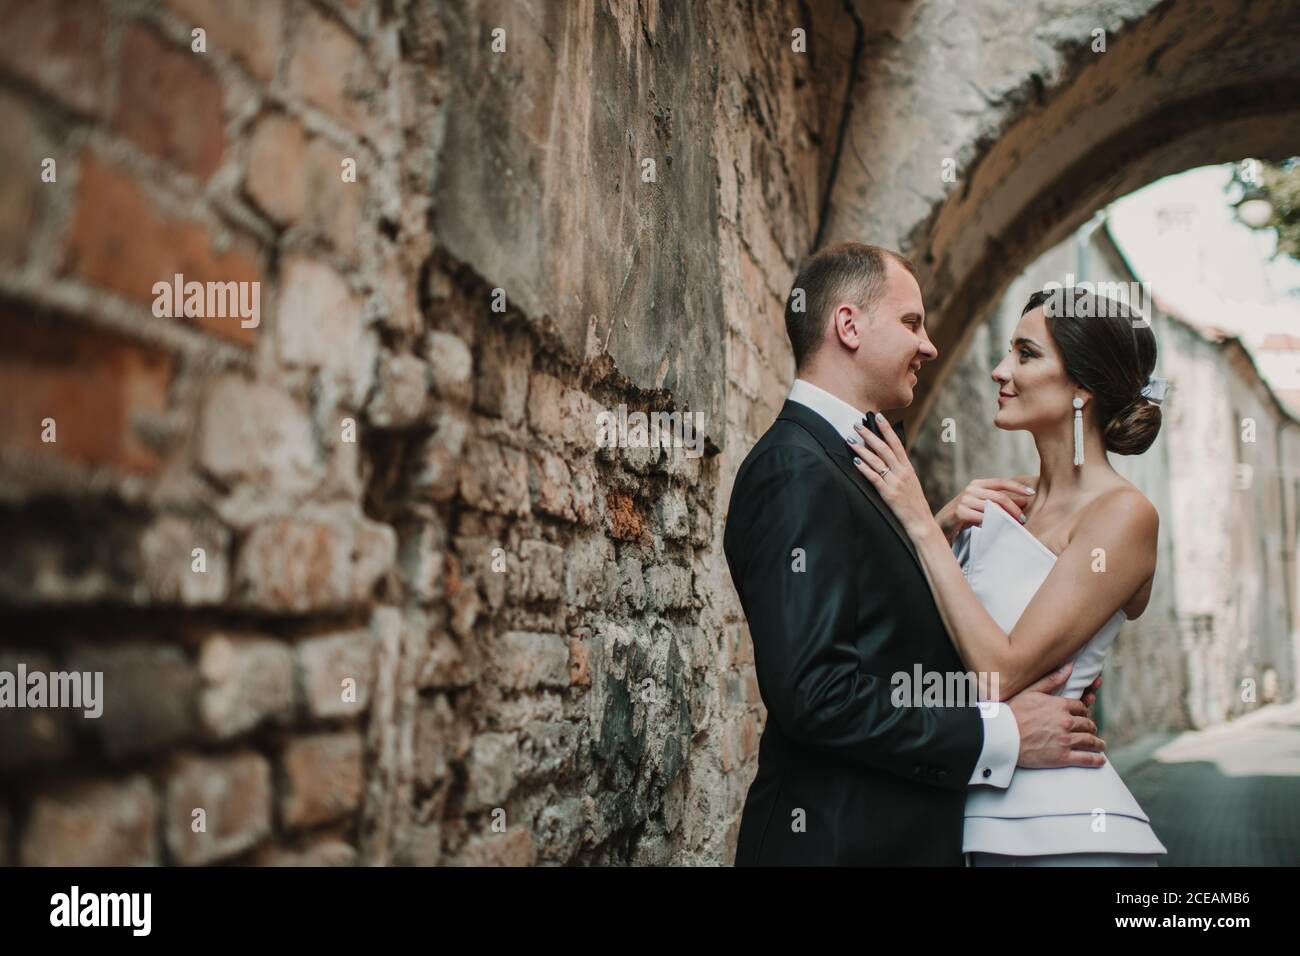 Married couple hugging near old wall Stock Photo